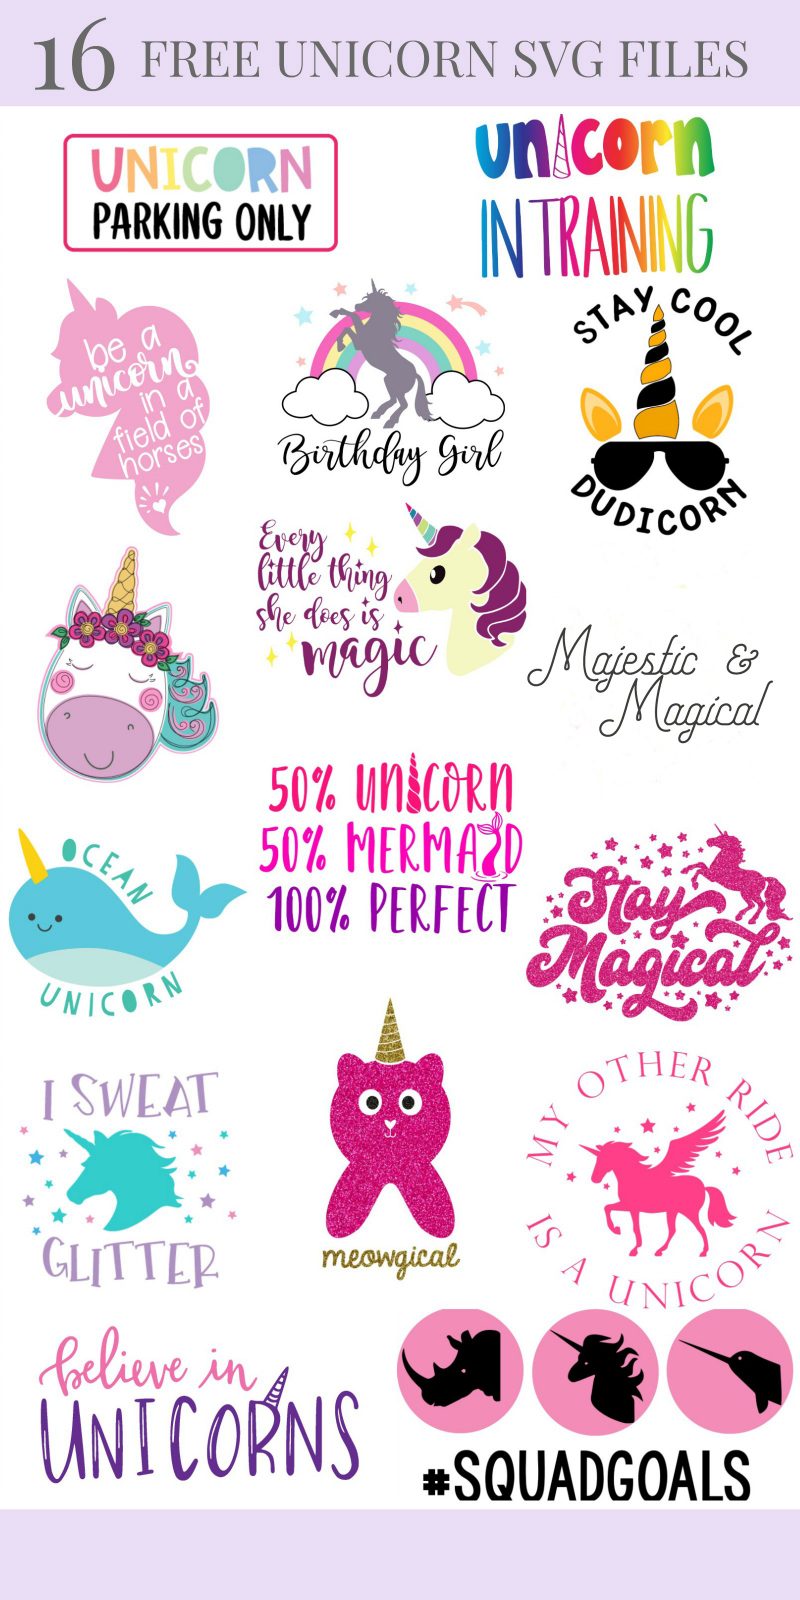 Unicorn projects you can make with your Cricut